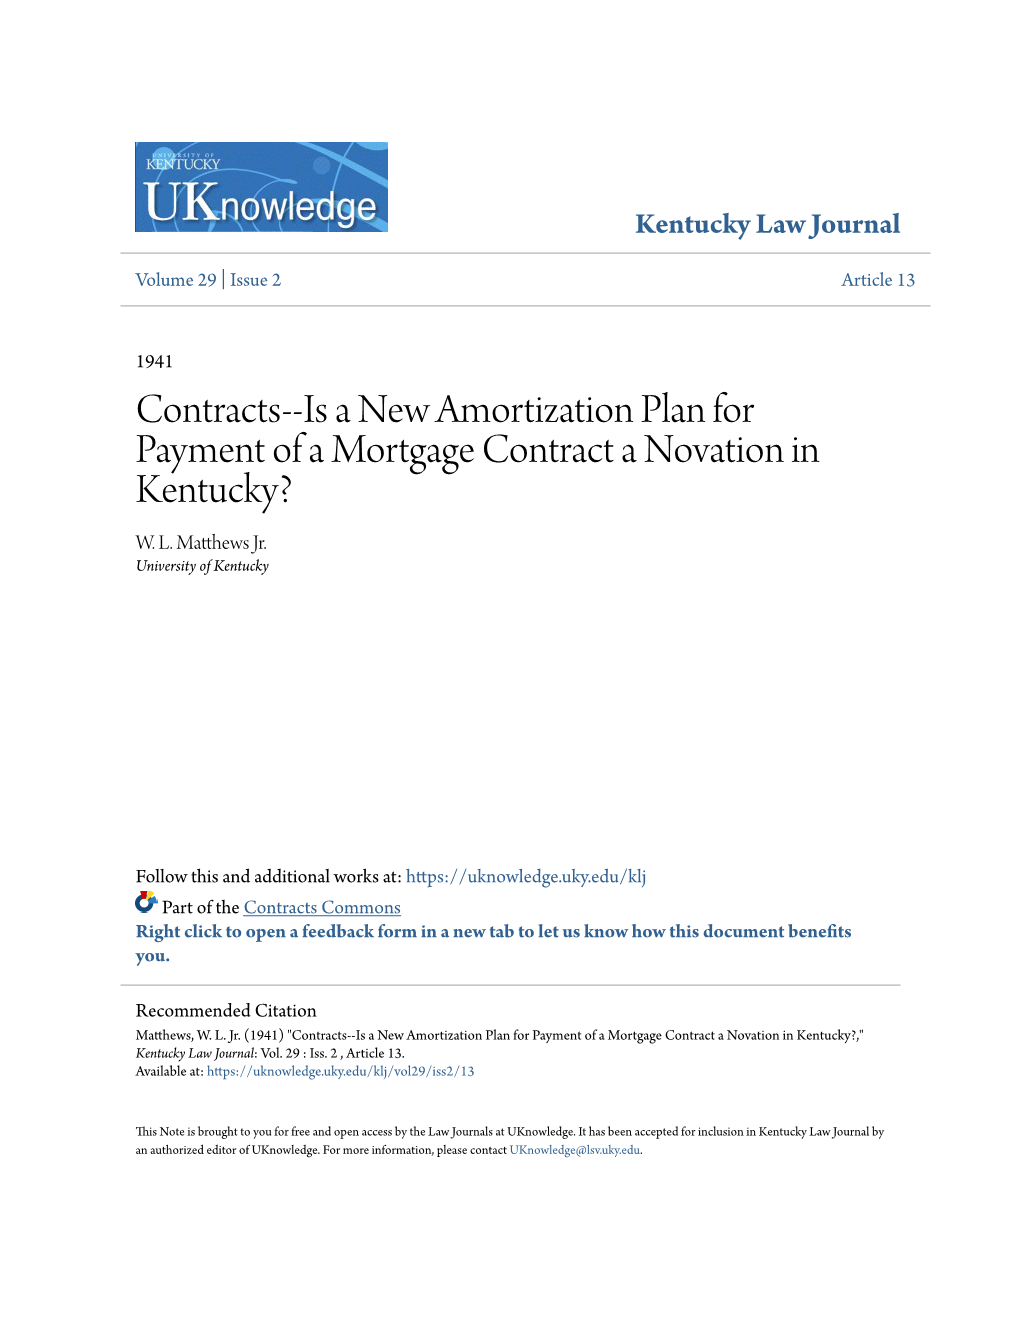 Contracts--Is a New Amortization Plan for Payment of a Mortgage Contract a Novation in Kentucky? W